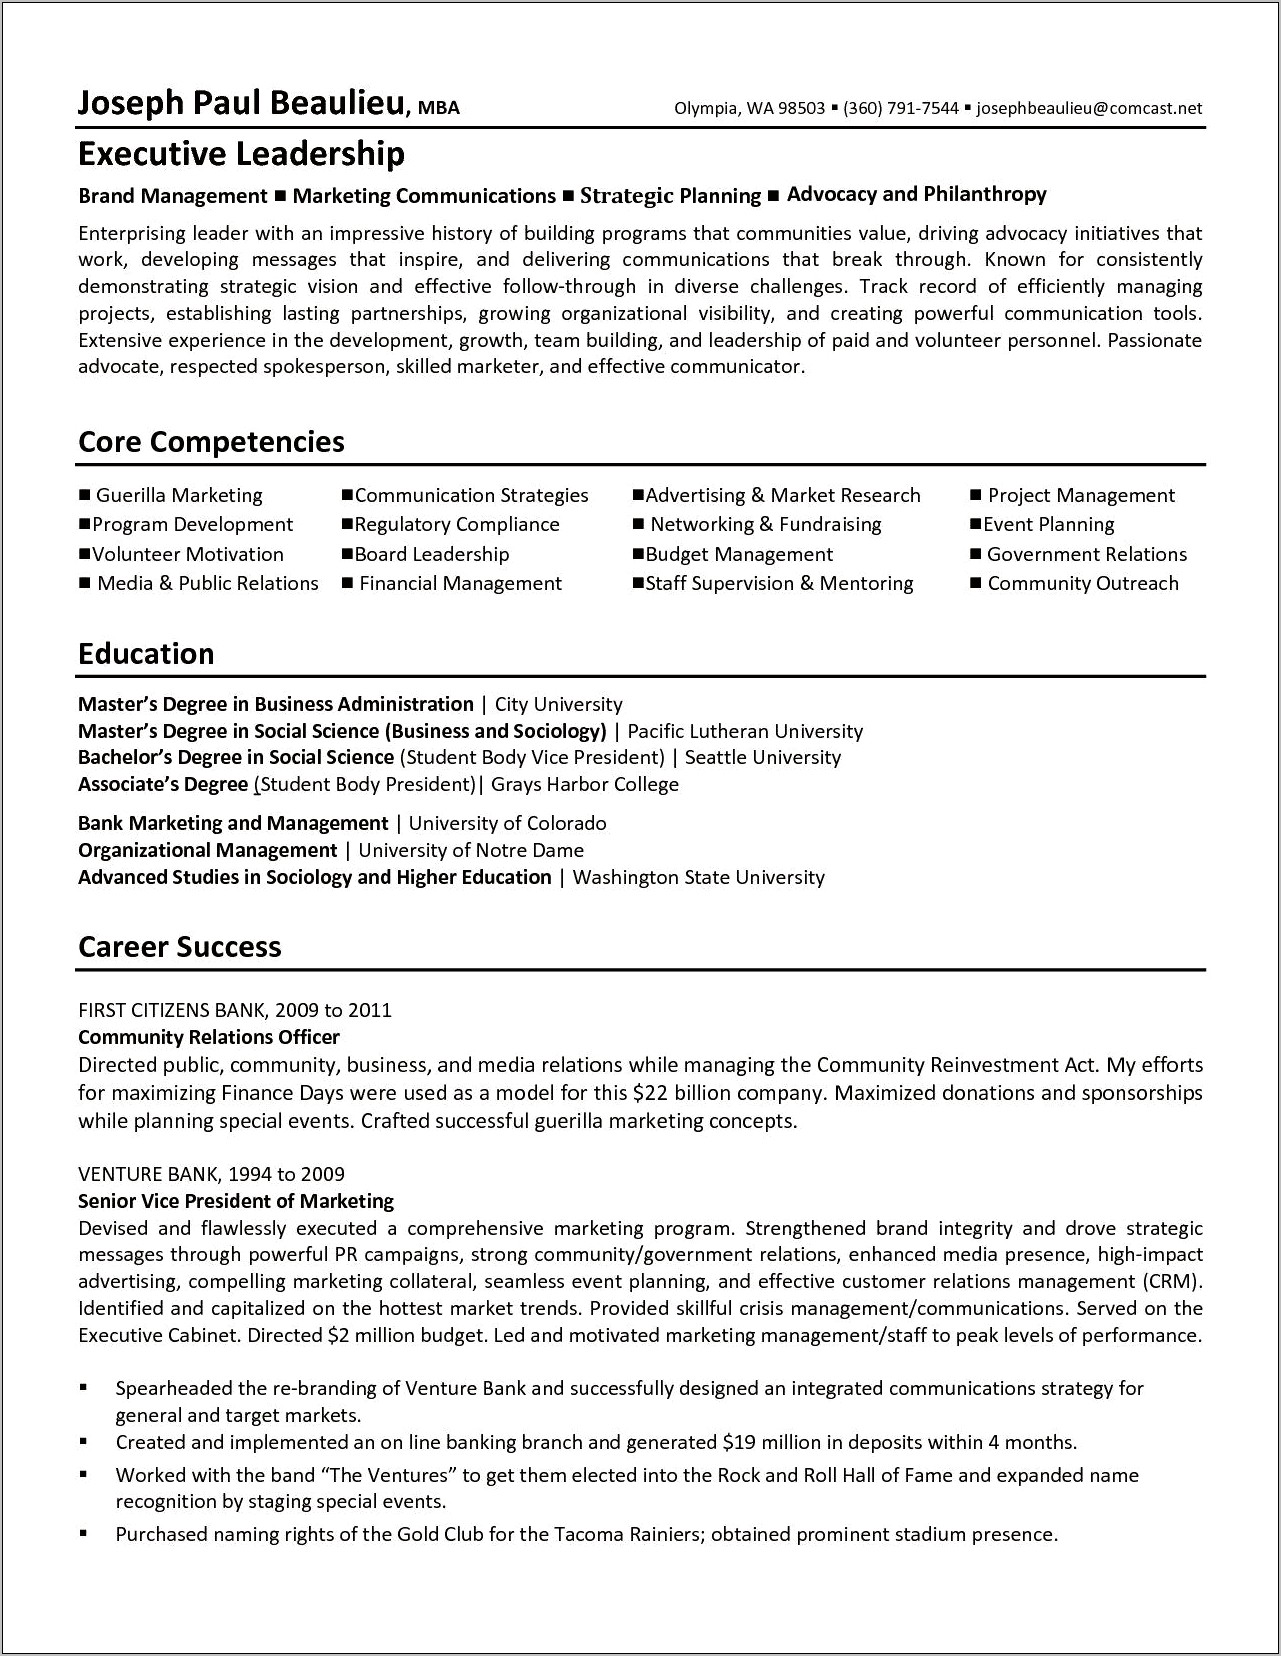 Sample Resume For Nonprofit Executive Director